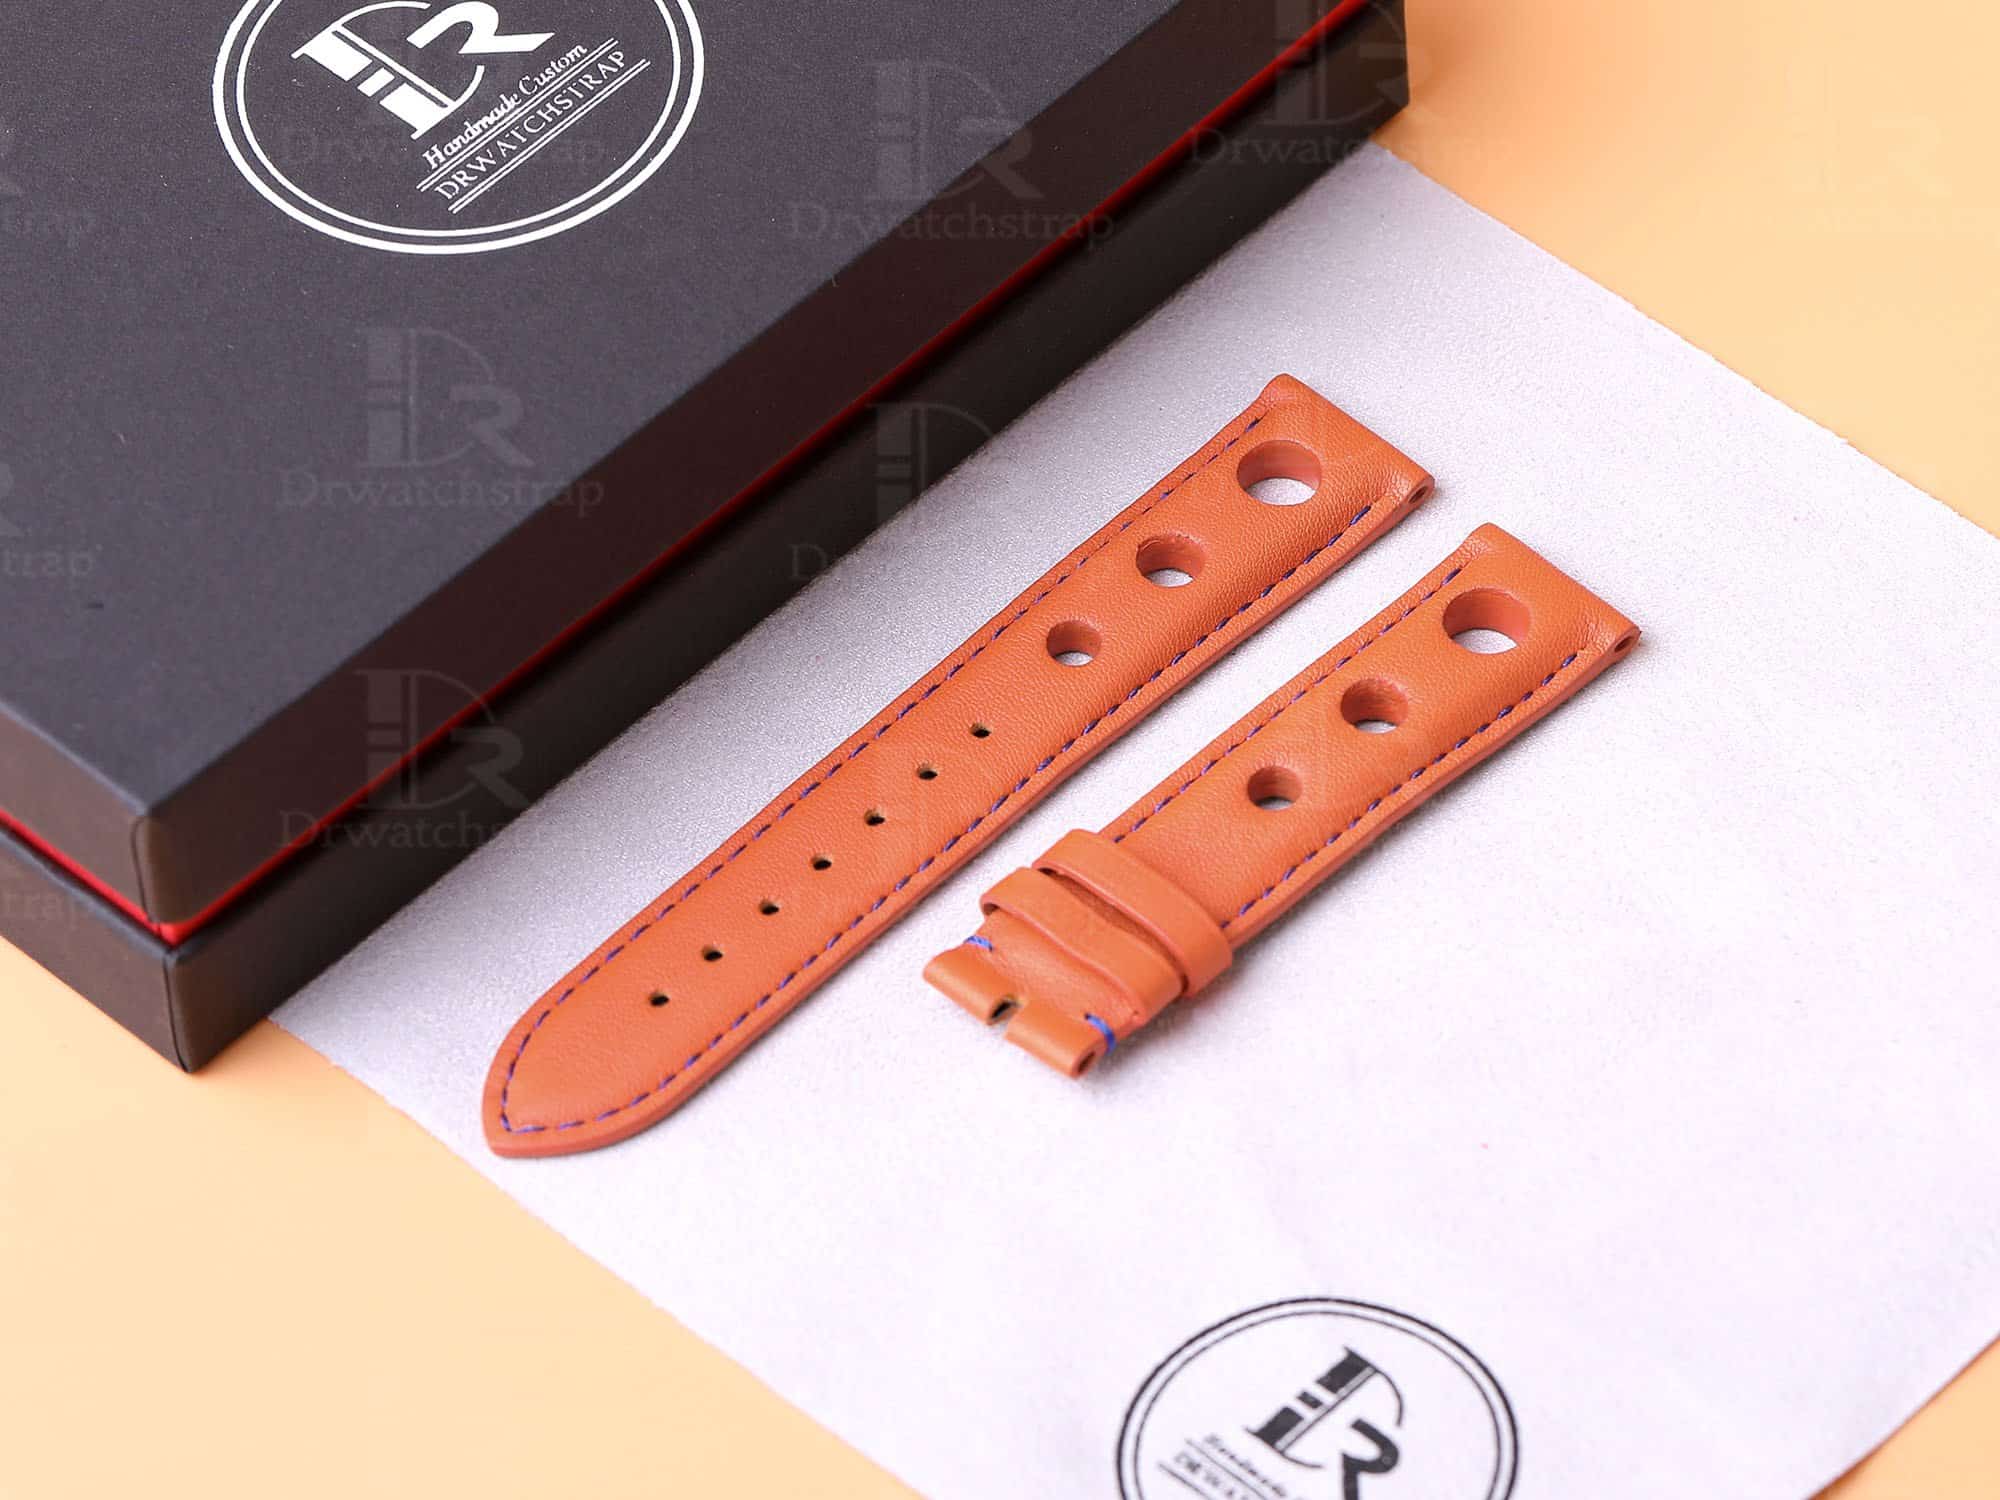 High-quality premium orange calf leather replacement watch Chopard Mille Miglia strap and watch band for ladies men online for sale - Chopard leather watch straps shipped to UK, US and all over the world at a low price